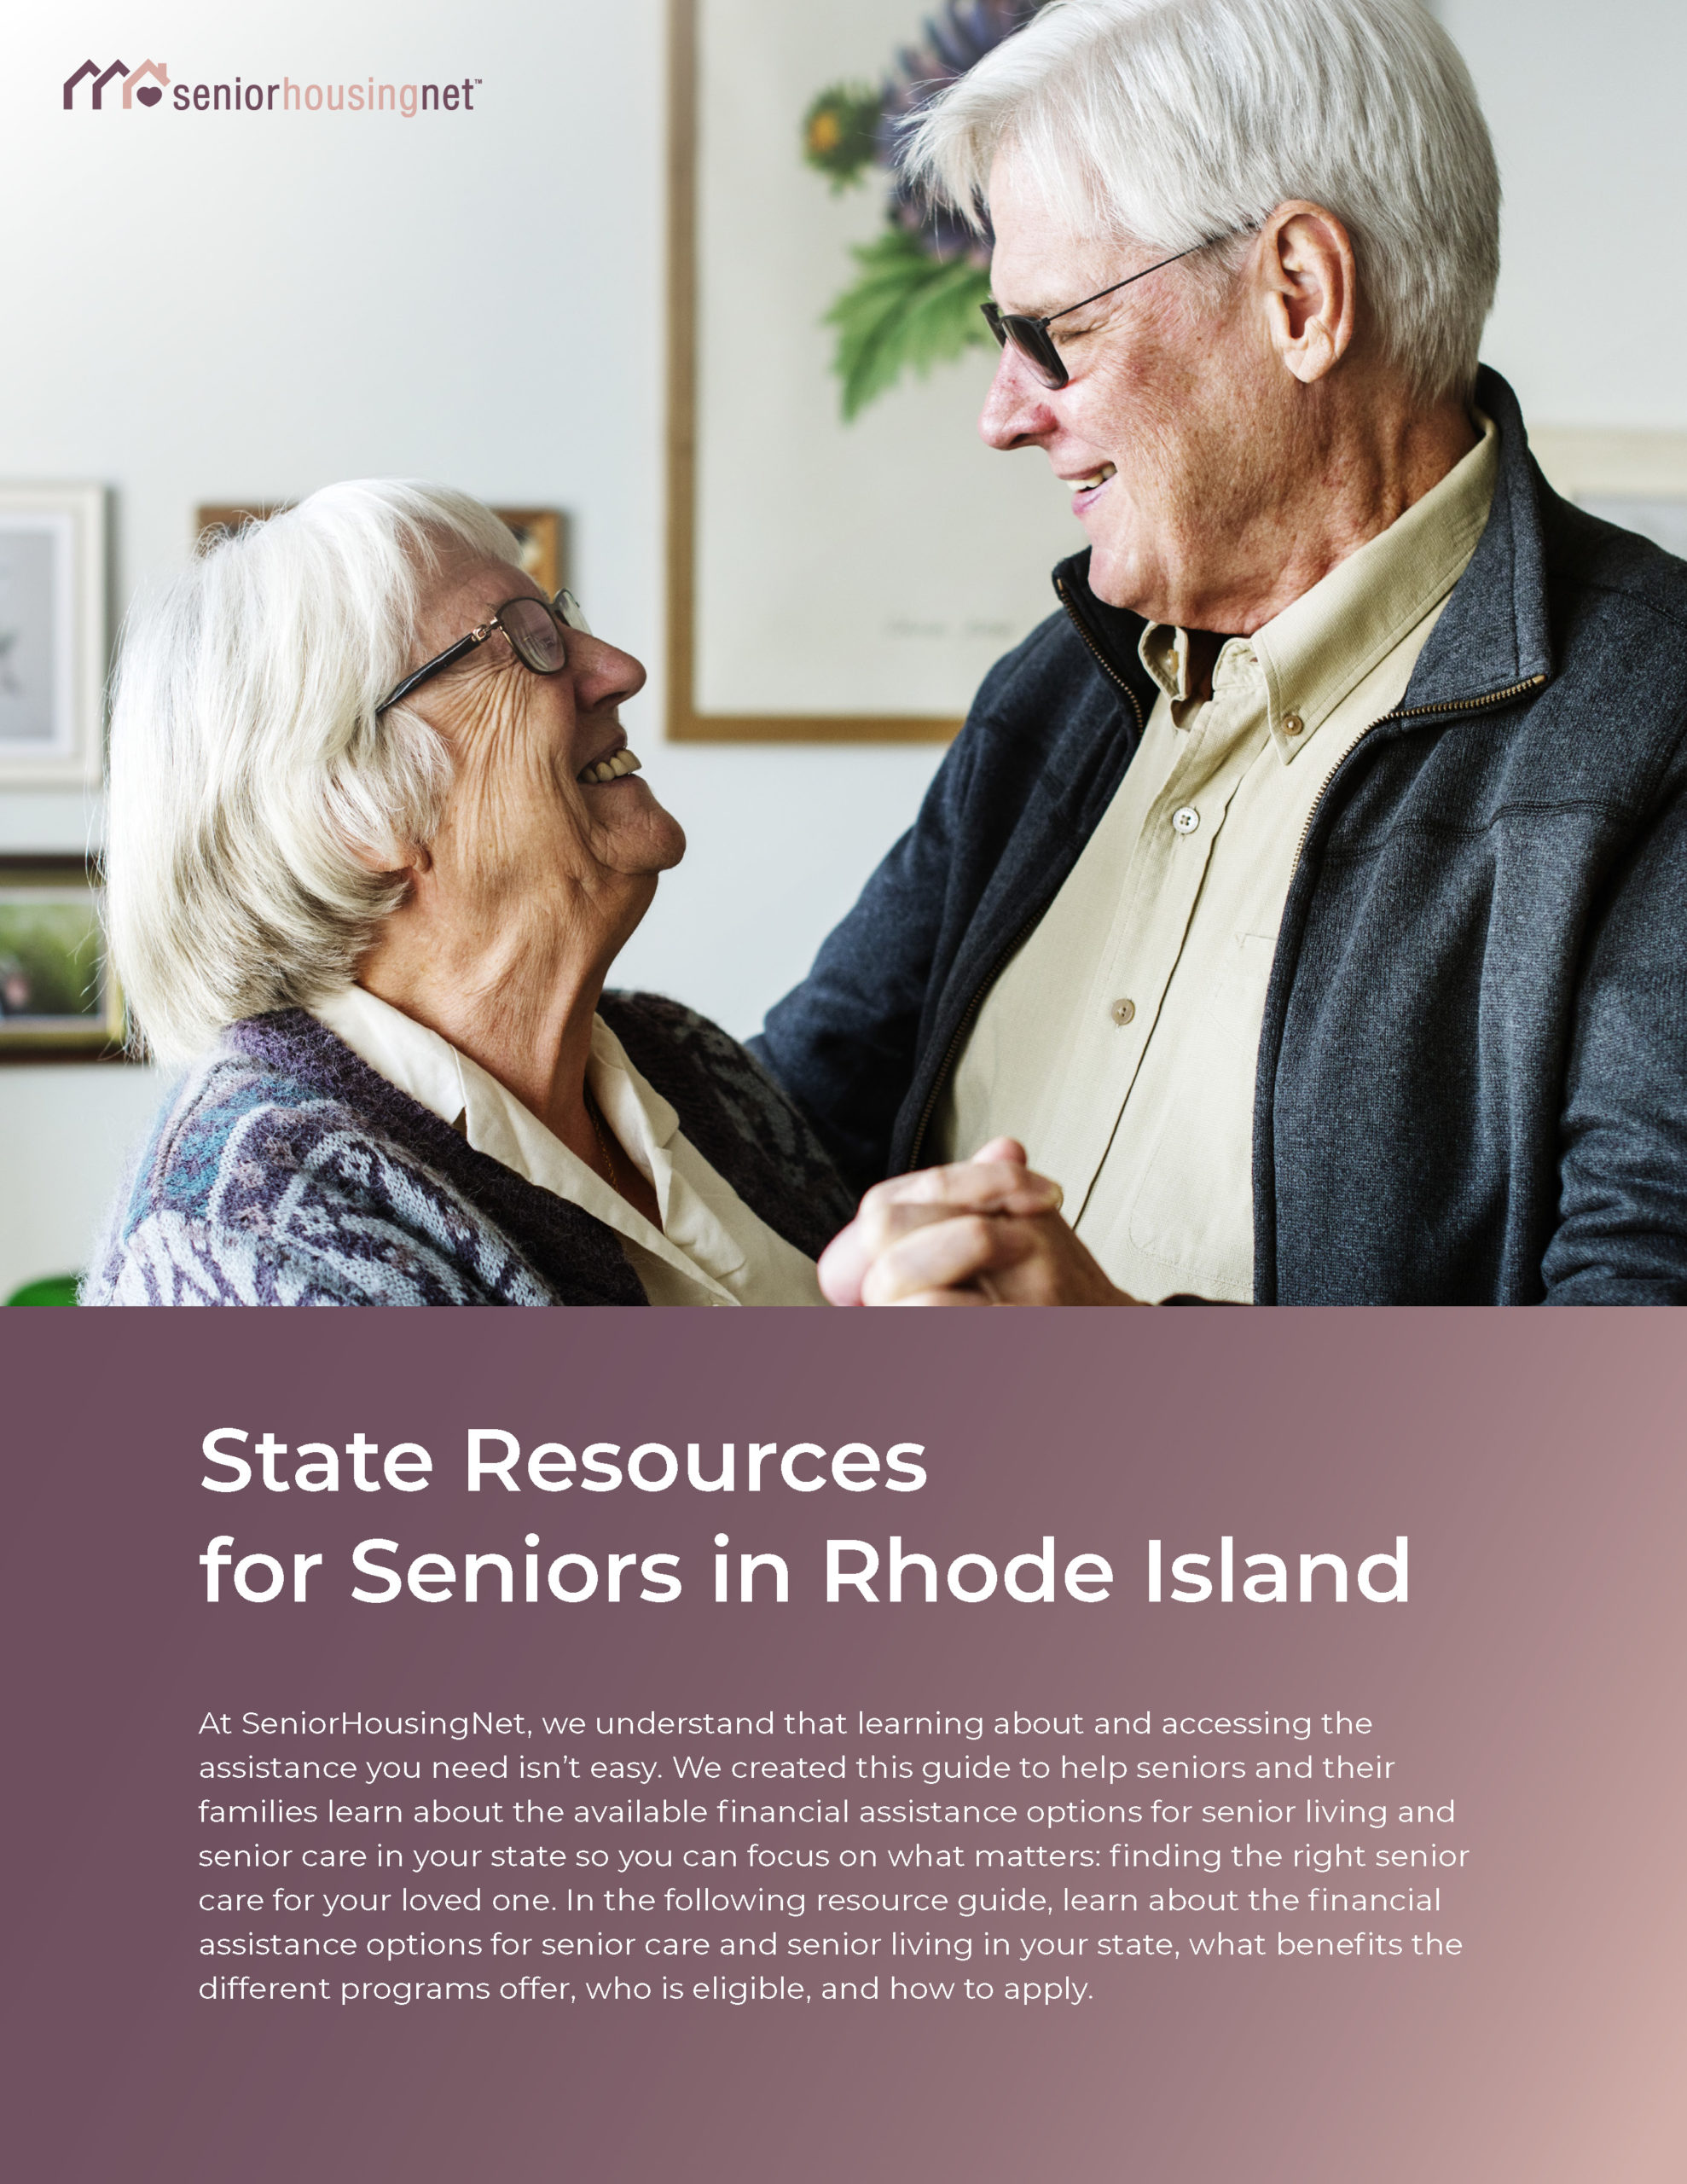 State Resources for Seniors in Rhode Island